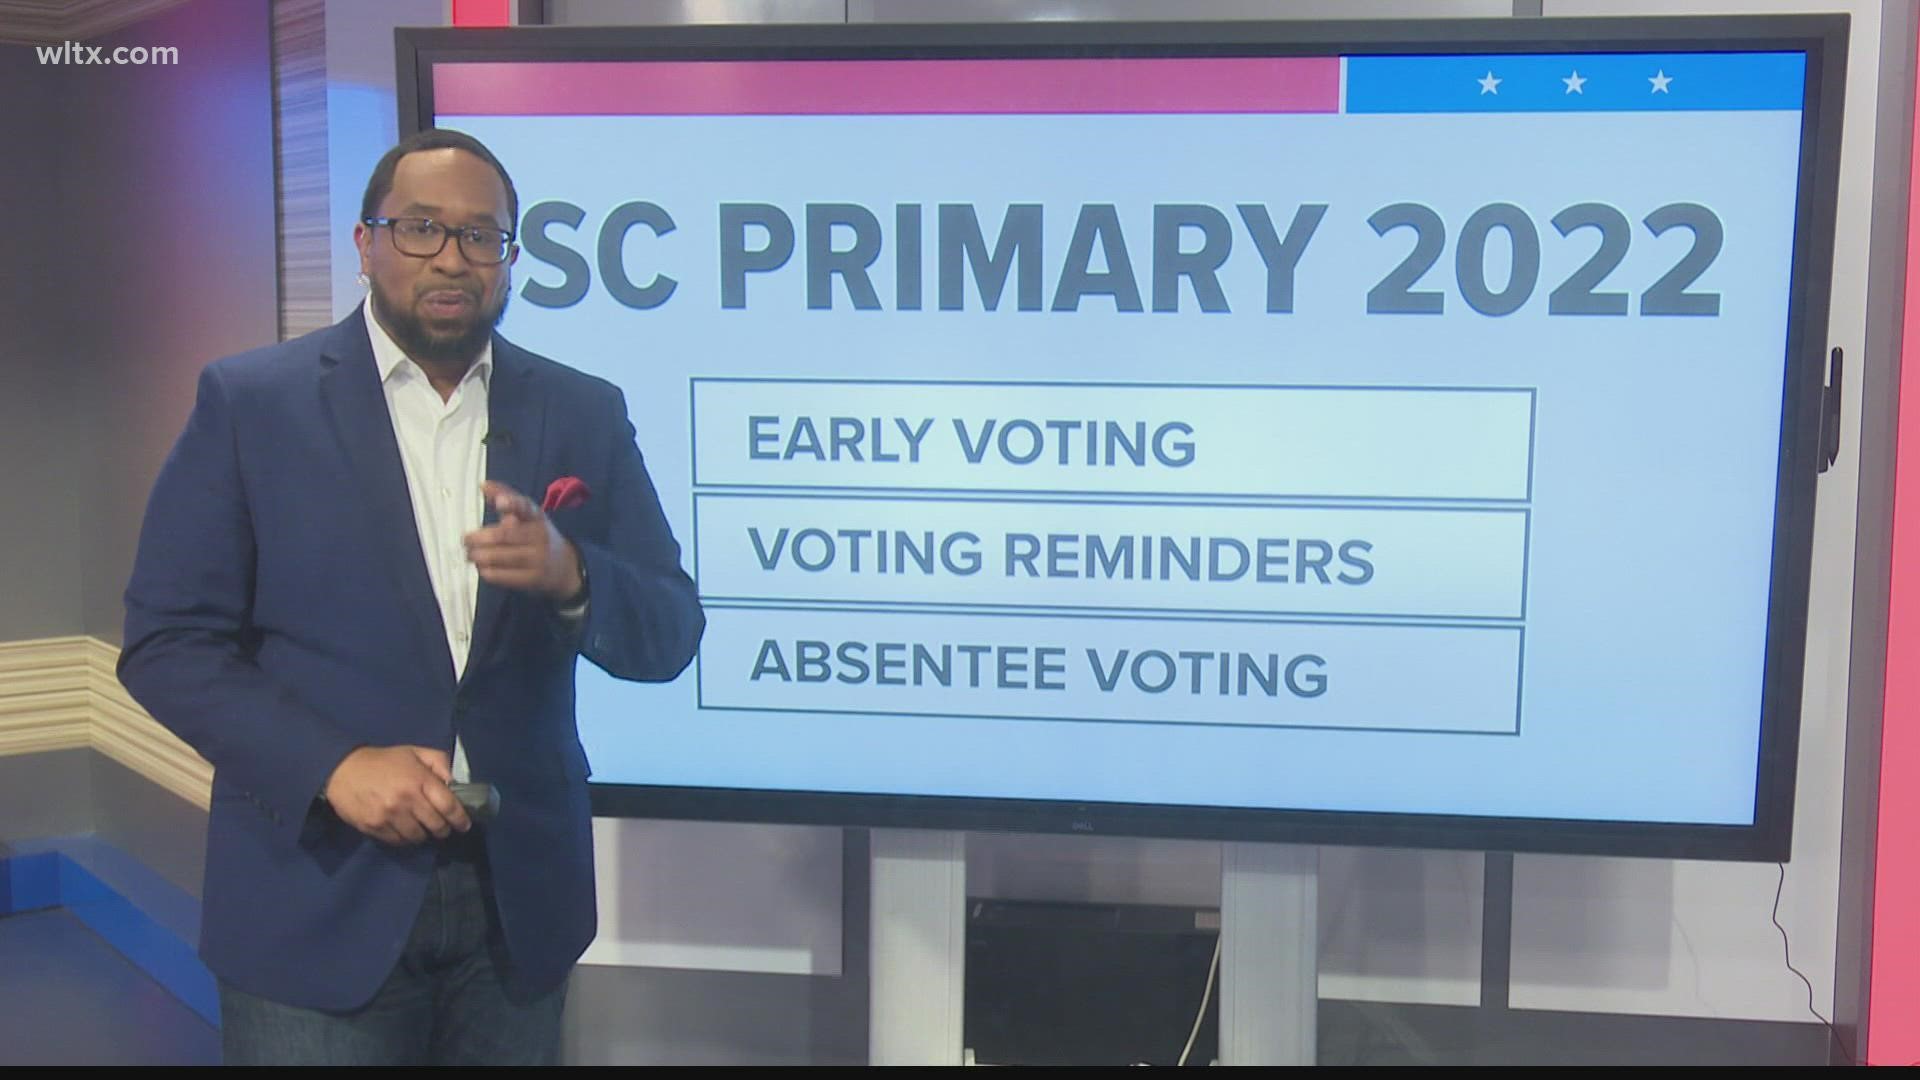 Early voting for the June 14th primary begins Tuesday, May 31, 2022. This is the first time early voting has been allowed in South Carolina.